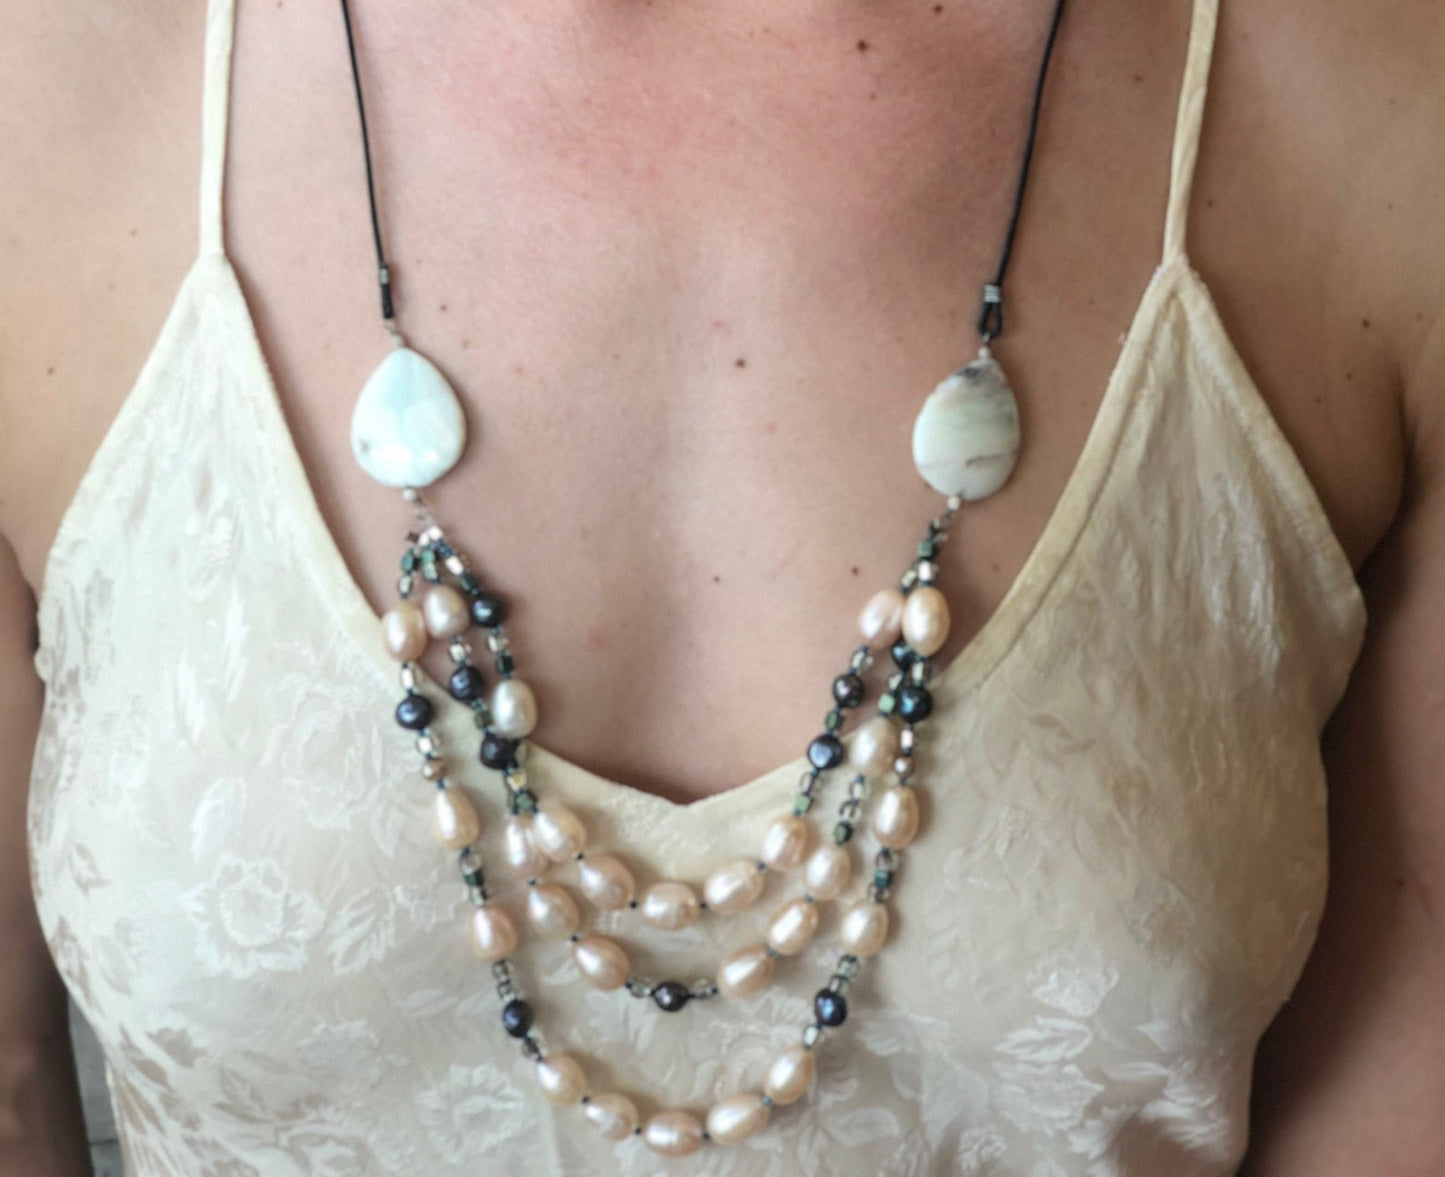 Pearls. Elegant necklace, three strands of soft pink fresh water pearls, chrysoprase gemstones, sterling silver and glass accent beads.